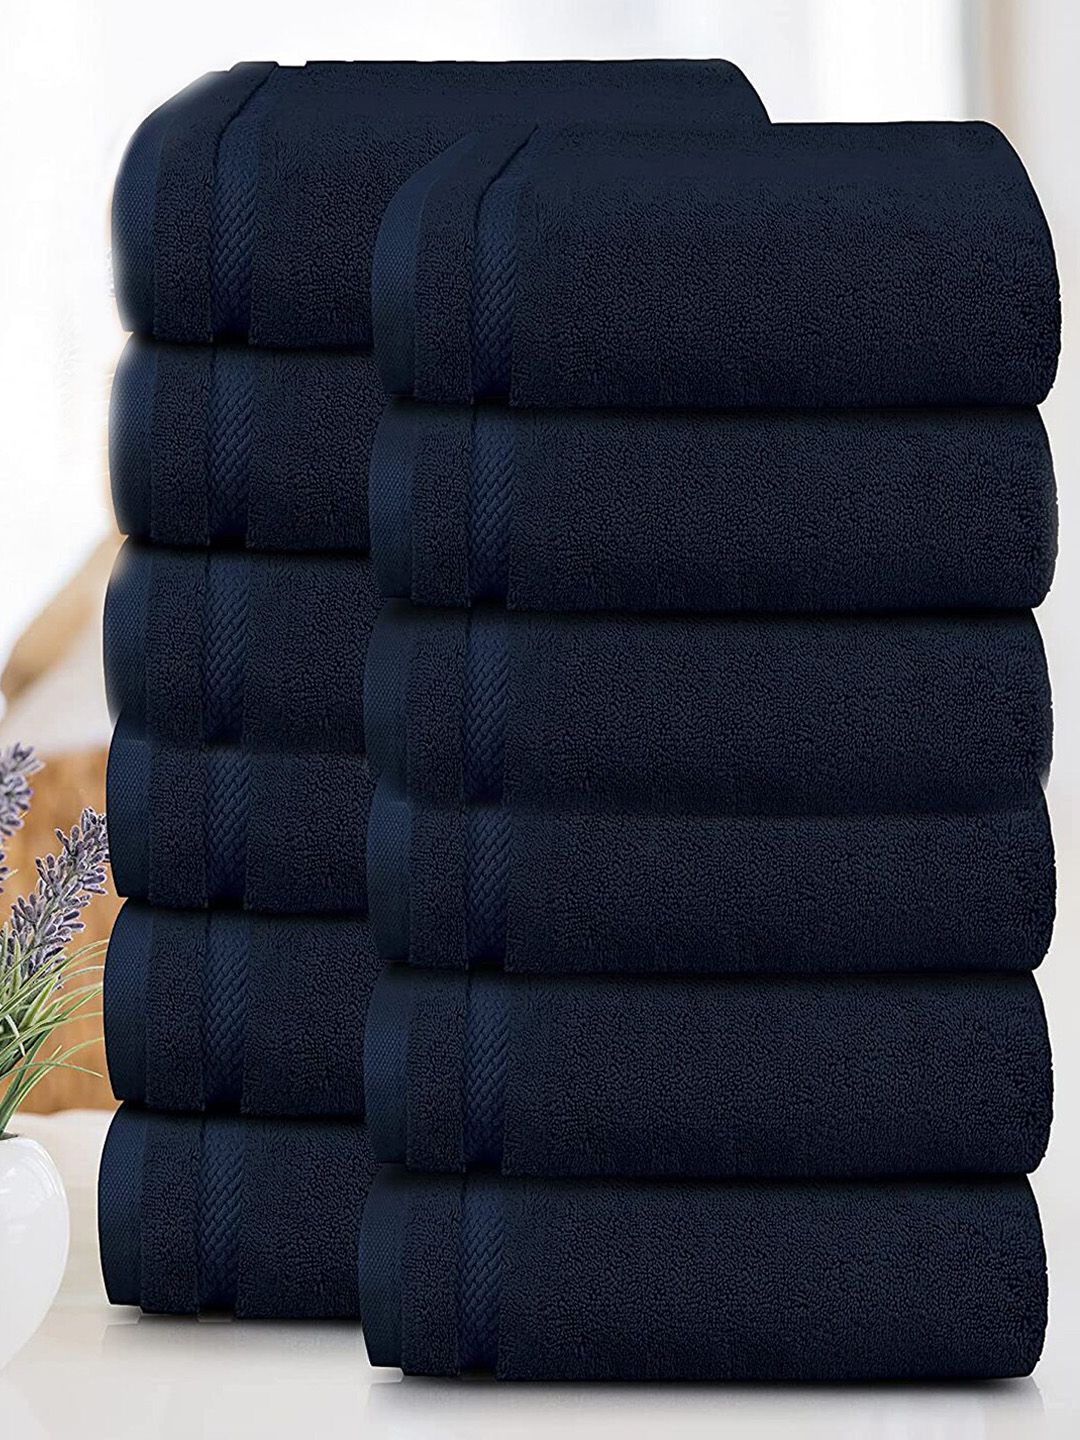 Trident 12 Piece Face Towel Set Navy Blue Luxury Collection 100% Cotton 625 GSM Price in India